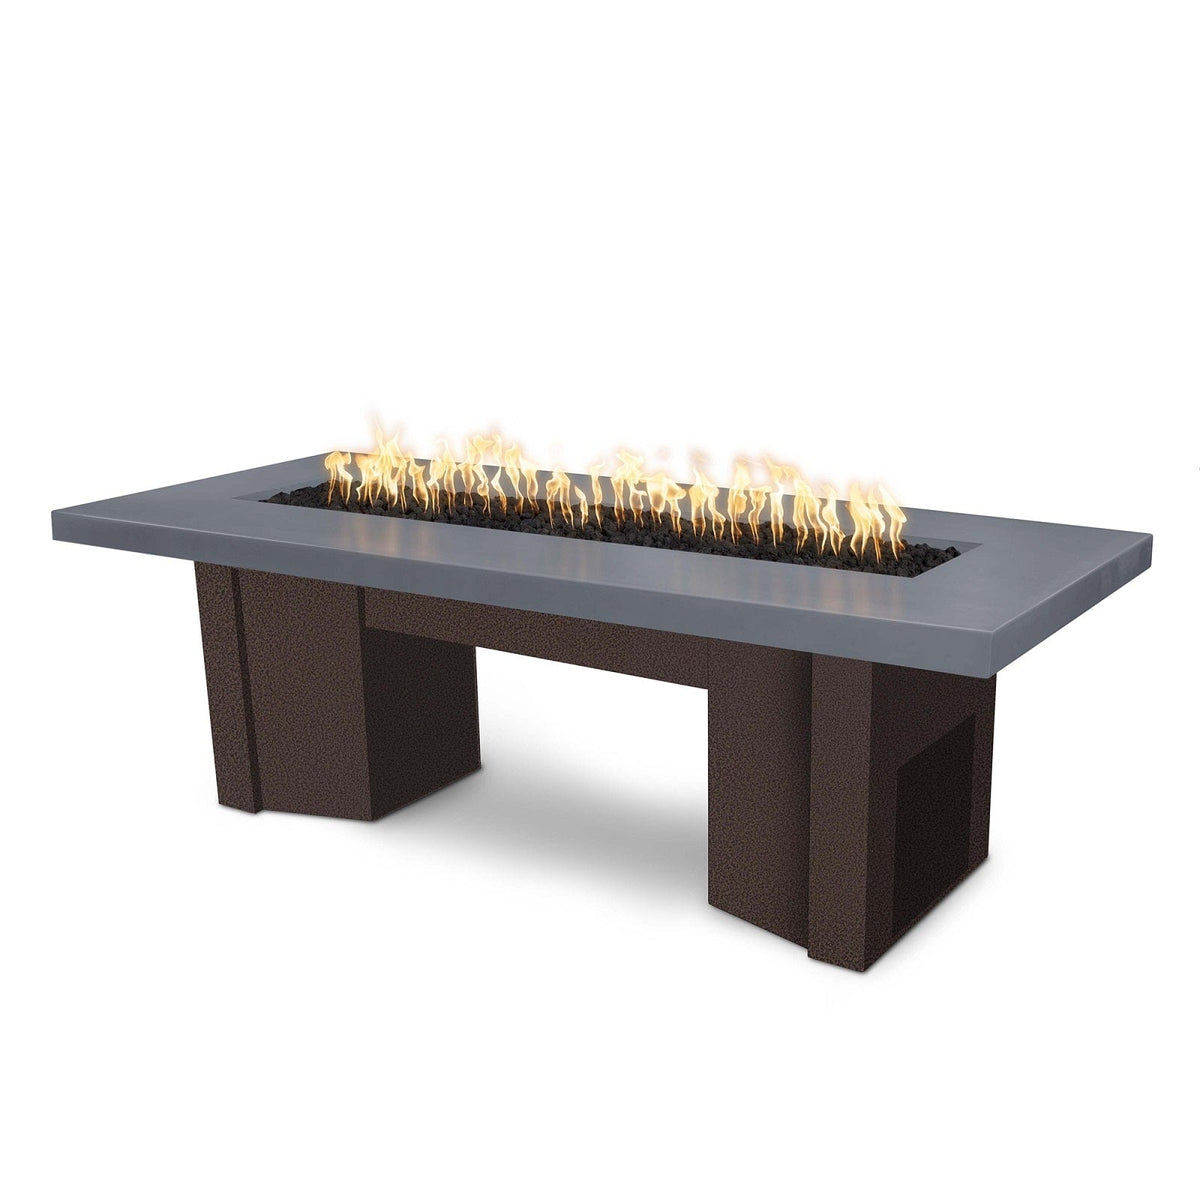 The Outdoor Plus Fire Features Gray (-GRY) / Copper Vein Powder Coated Steel (-CPV) The Outdoor Plus 60&quot; Alameda Fire Table Smooth Concrete in Natural Gas - Flame Sense System with Push Button Spark Igniter / OPT-ALMGFRC60FSEN-NG